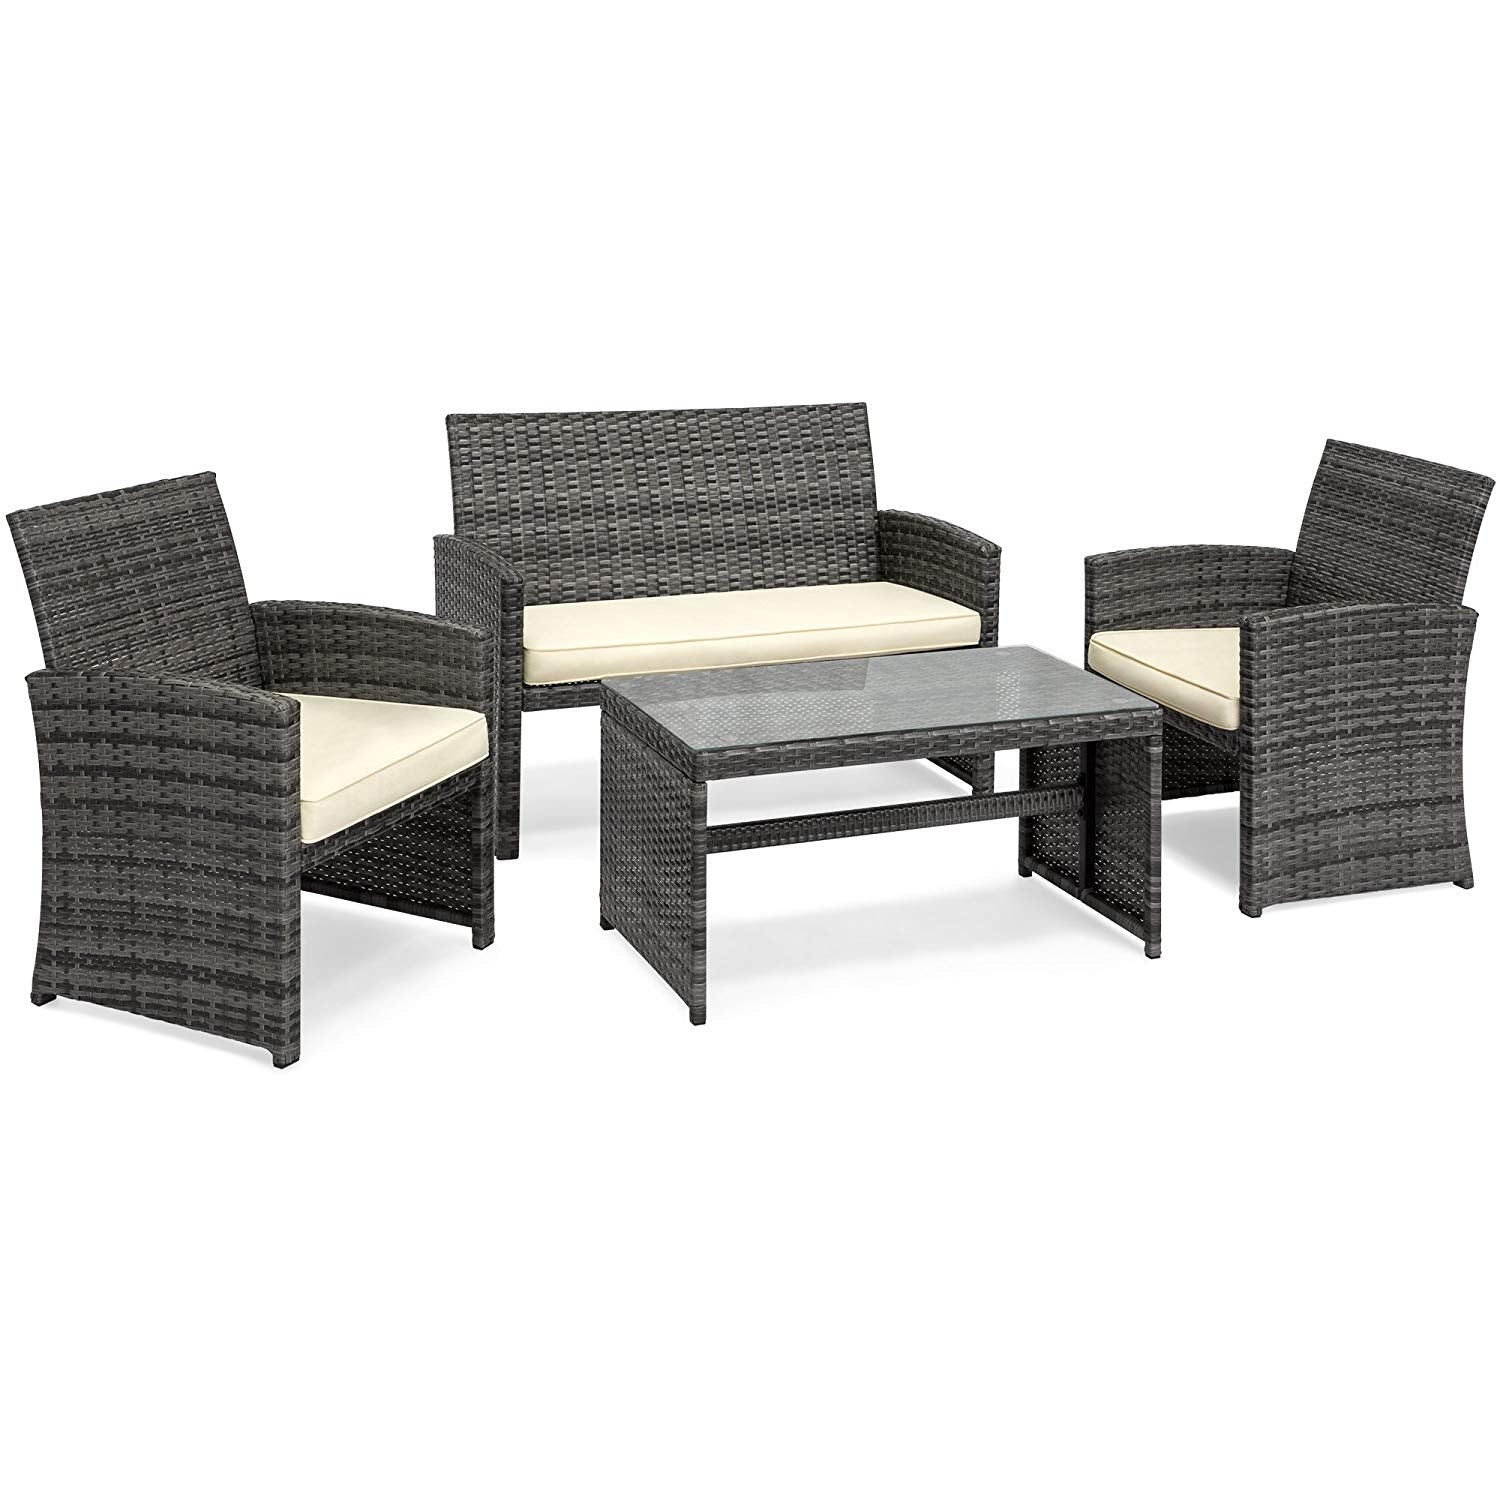 Best Choice Products 4-Piece Wicker Patio Furniture Set w/Tempered Glass, 3 Sofas, Table, Cushioned Seats - Gray